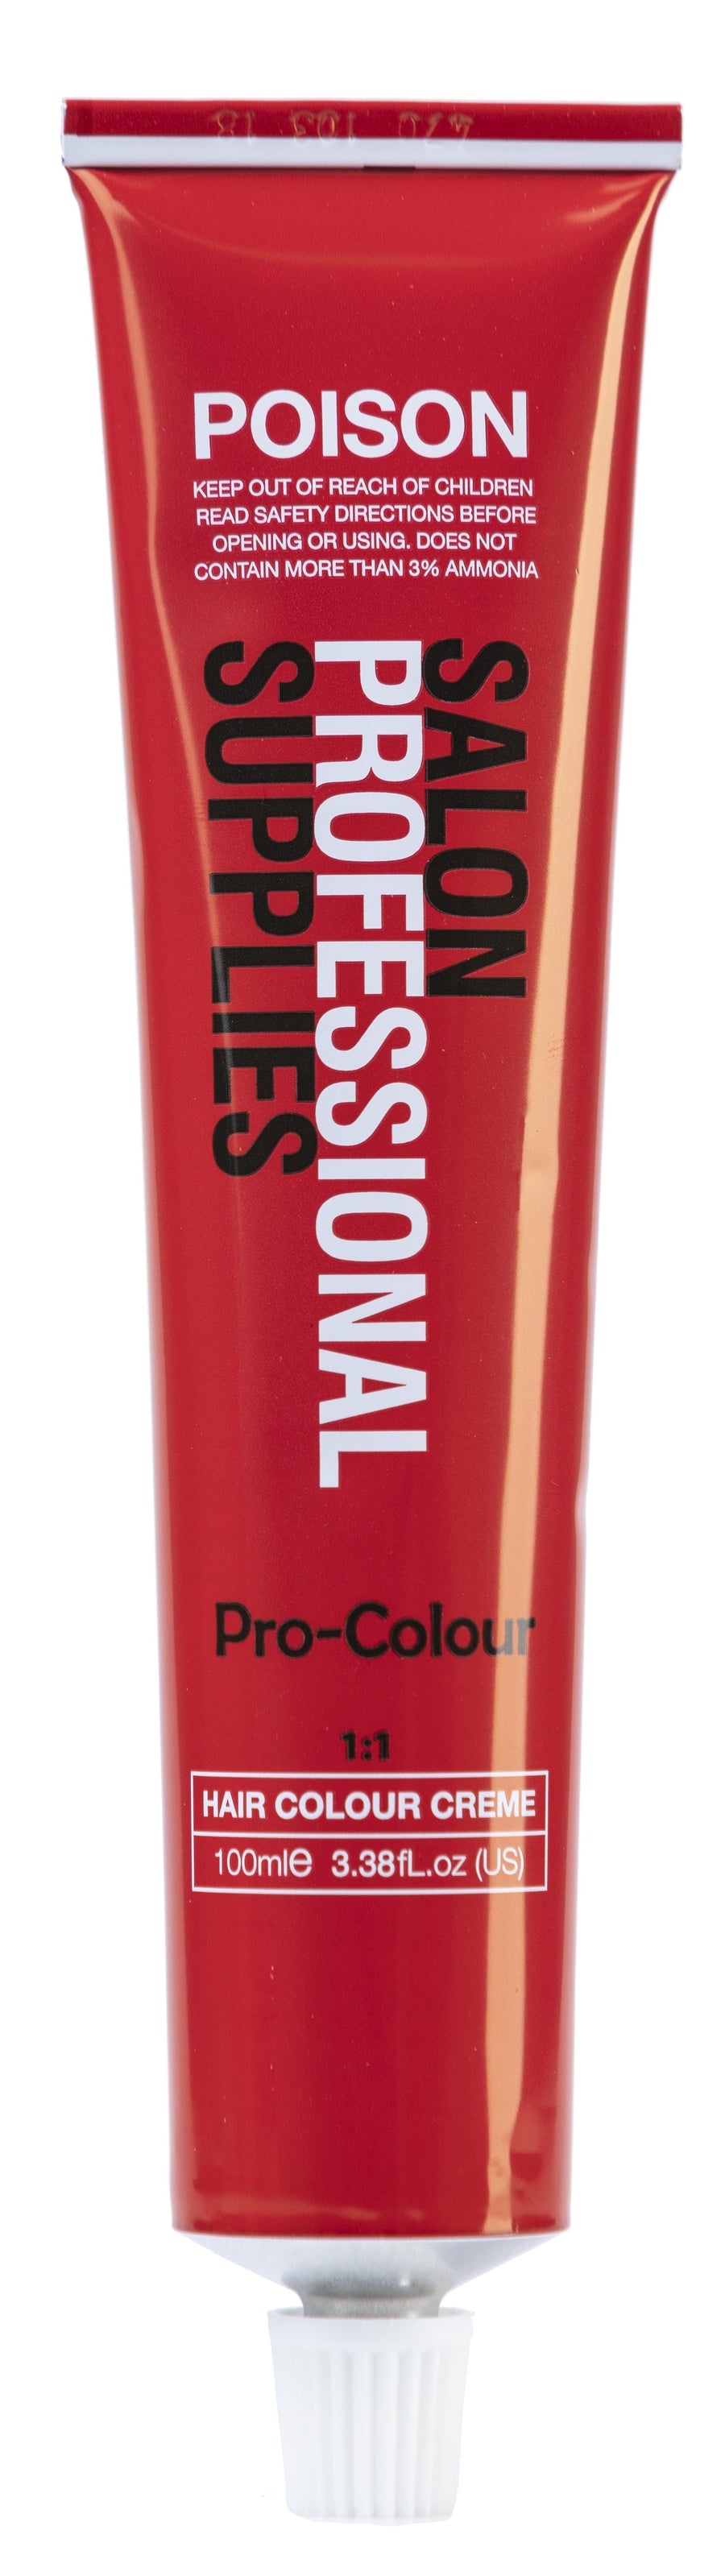 SPS Tint 5.4 Light Copper Brown 100ml - Price Attack